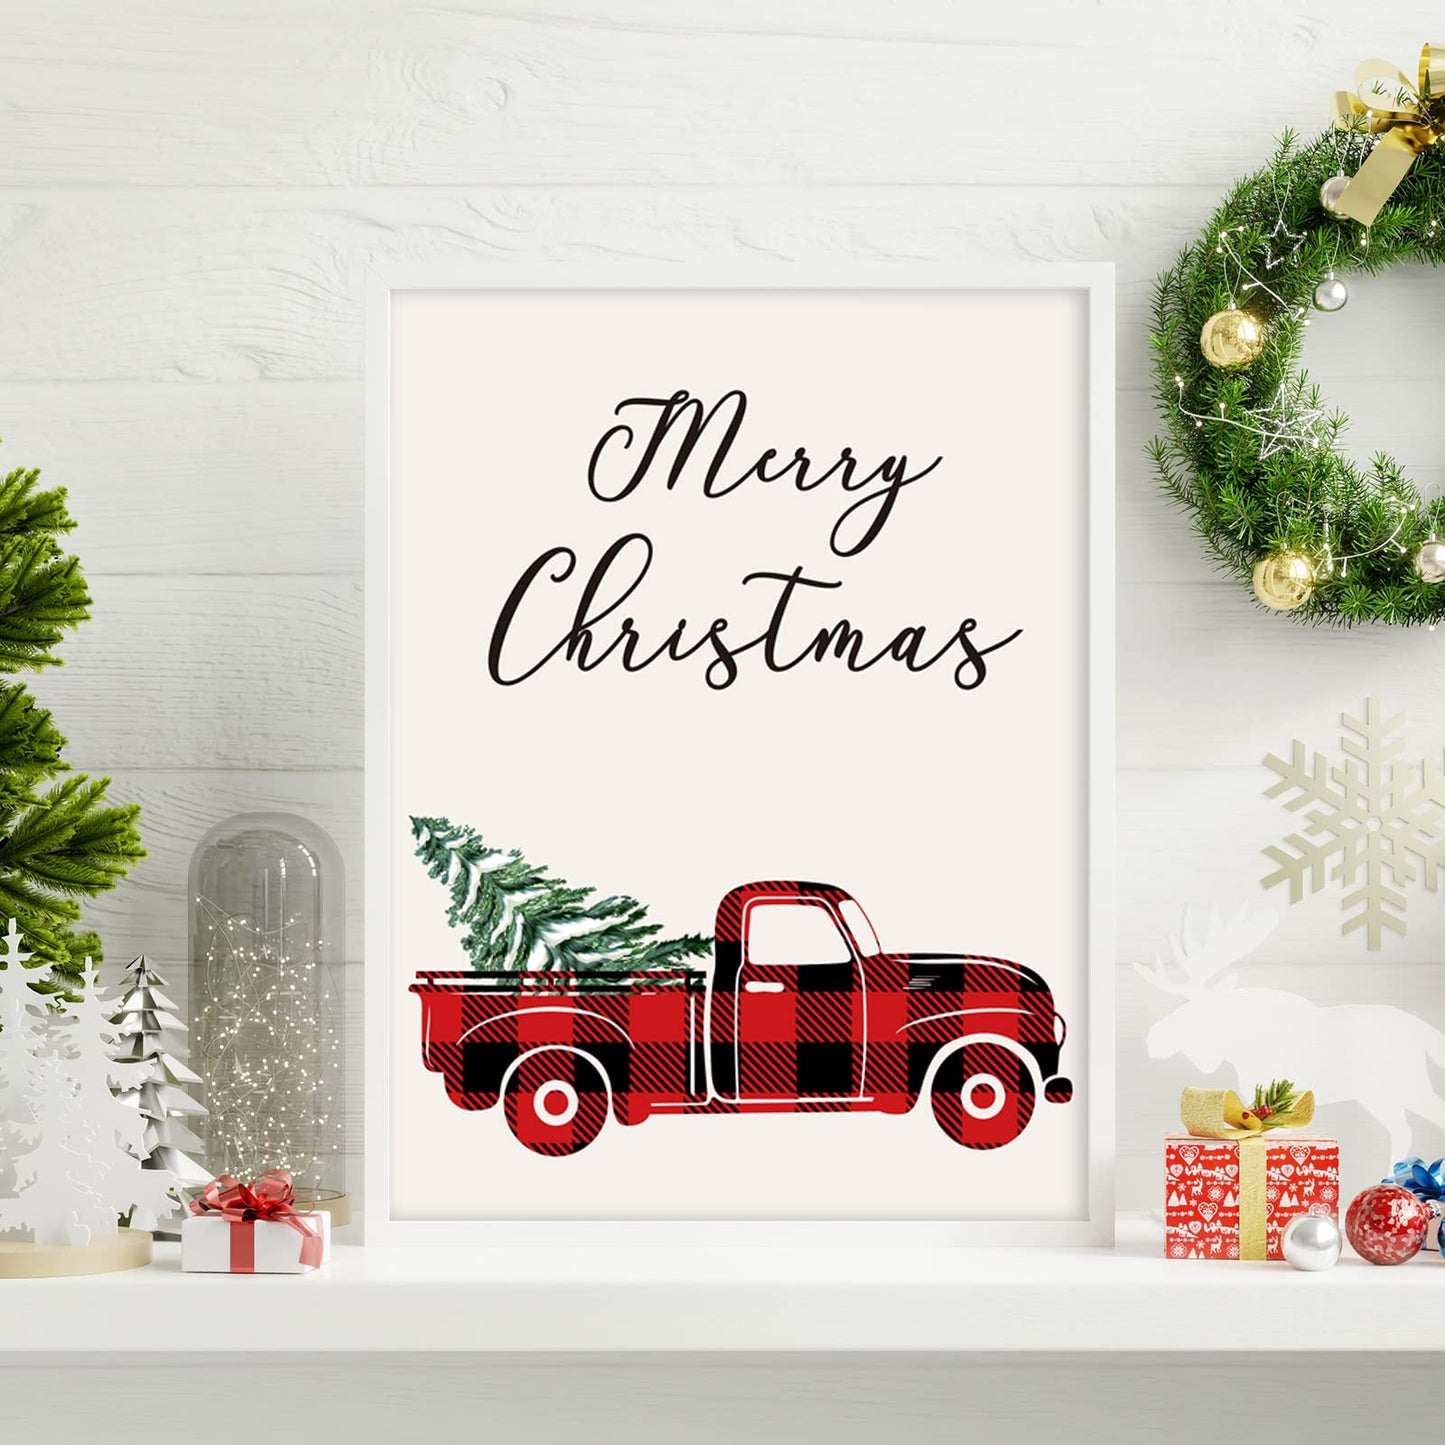 AnyDesign 6Pcs Christmas Wall Art Prints 8x10in Red Black Buffalo Plaid Art Poster Decor Farmhouse Xmas Tree Truck Reindeer Posters Room Decor for Gallery Living Room Bathroom Wall Decor(NO FRAME)